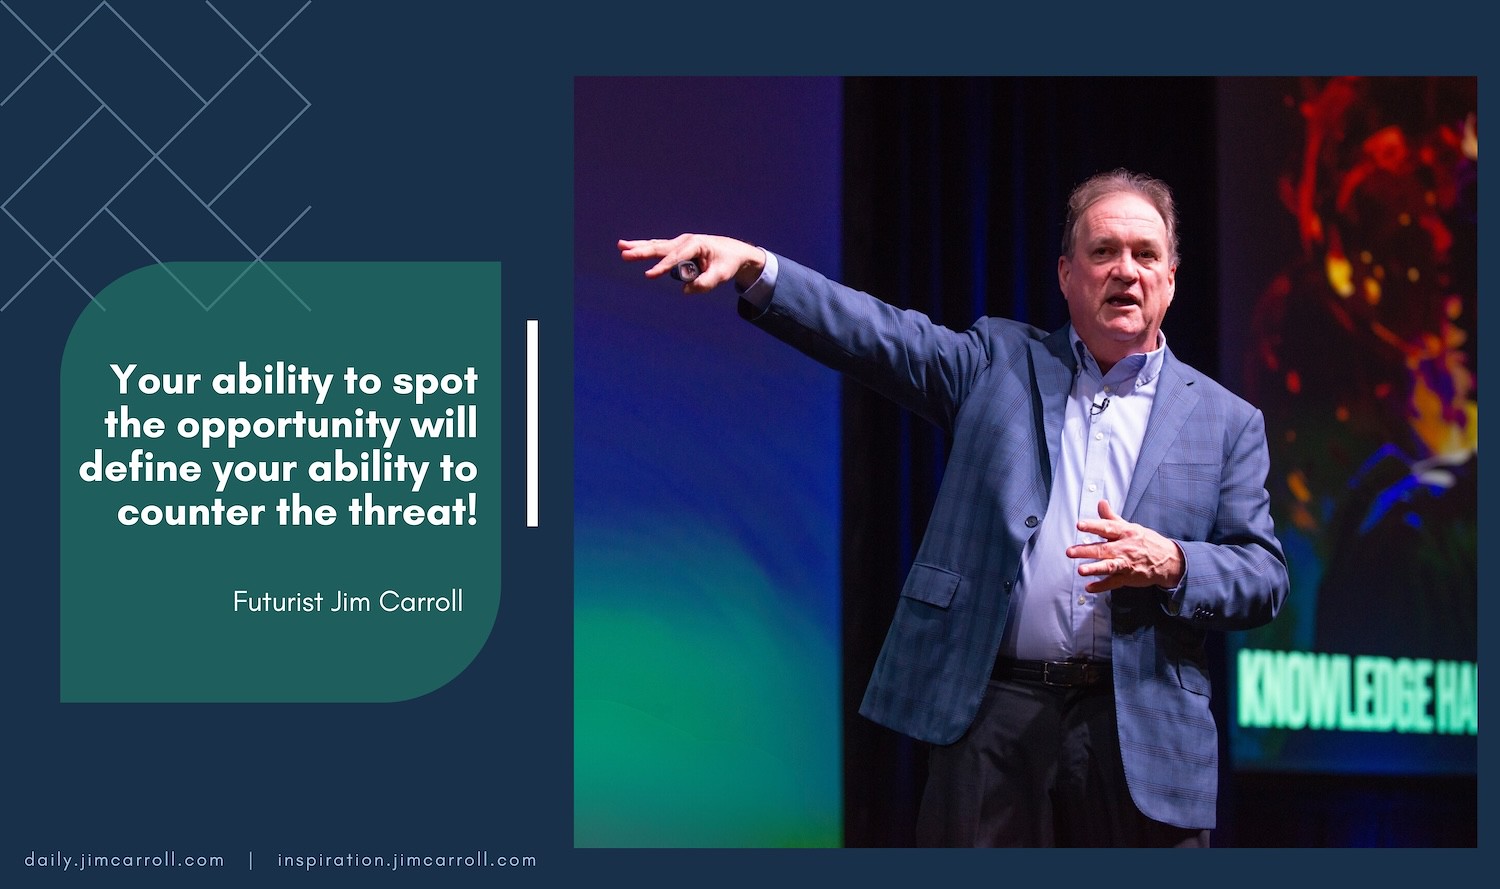 "Your ability to spot the opportunity will define your ability to counter the threat!" - Futurist Jim Carroll